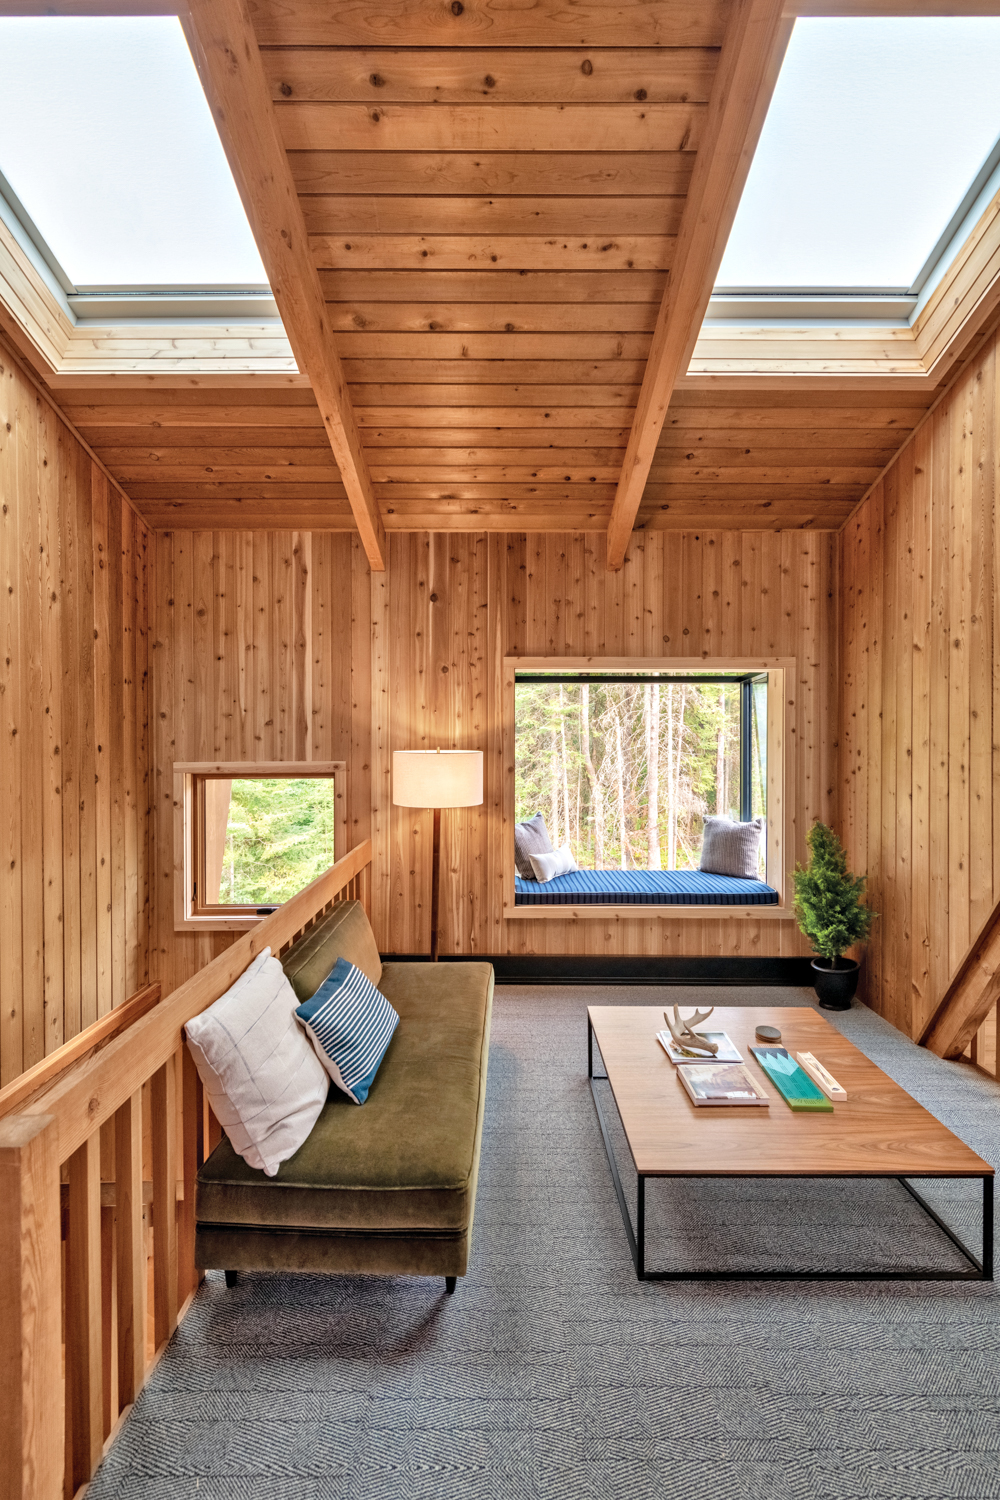 A completely wooden room with a pixture-box window seat. RED Winner.